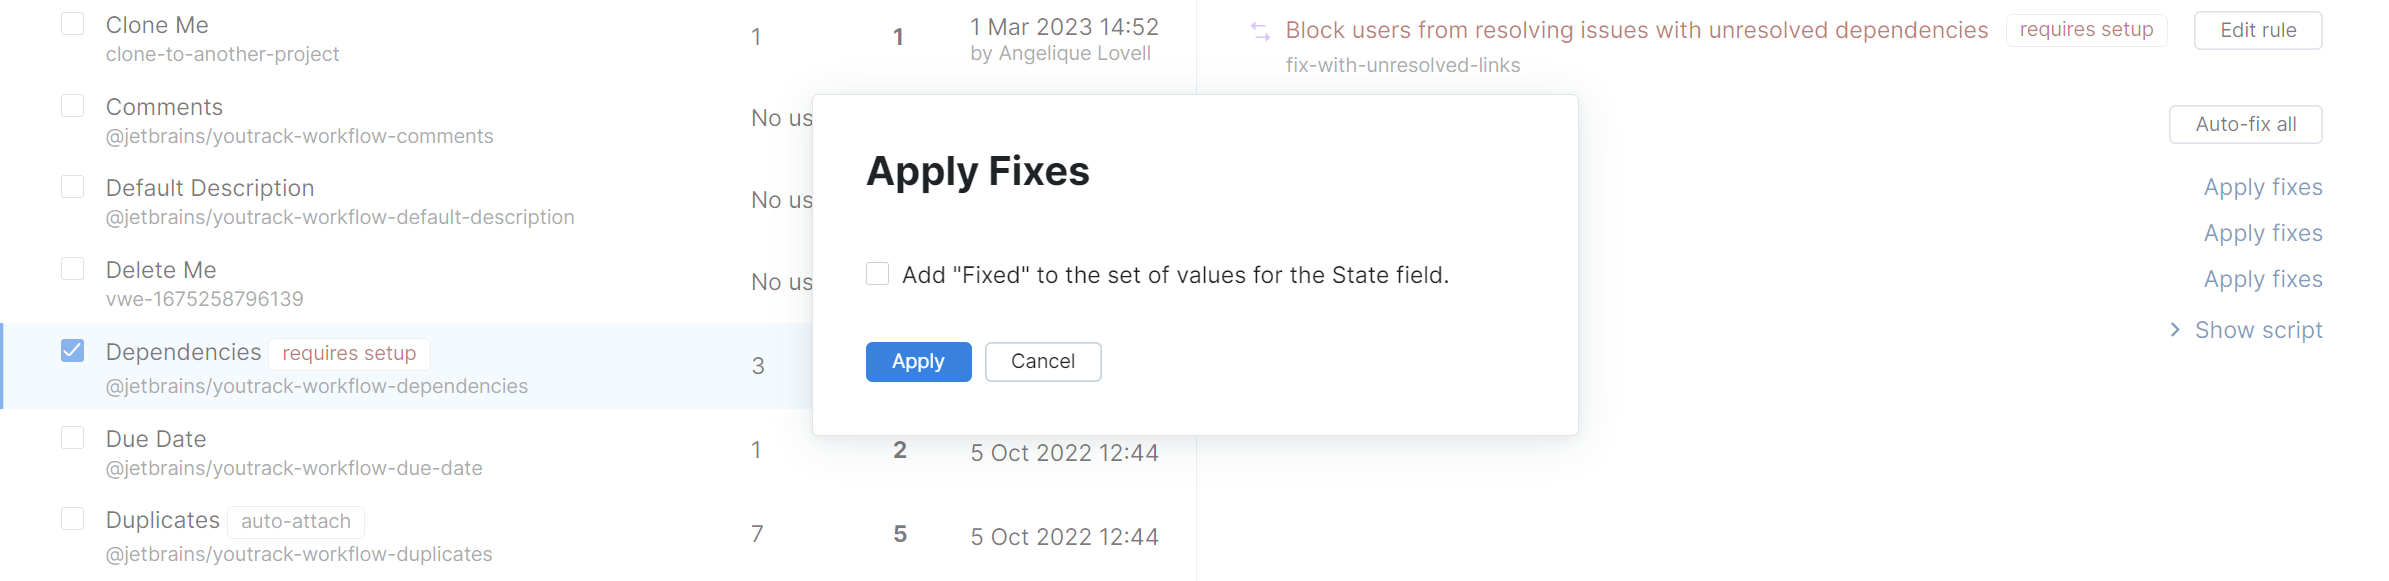 Attach workflows apply fixes.